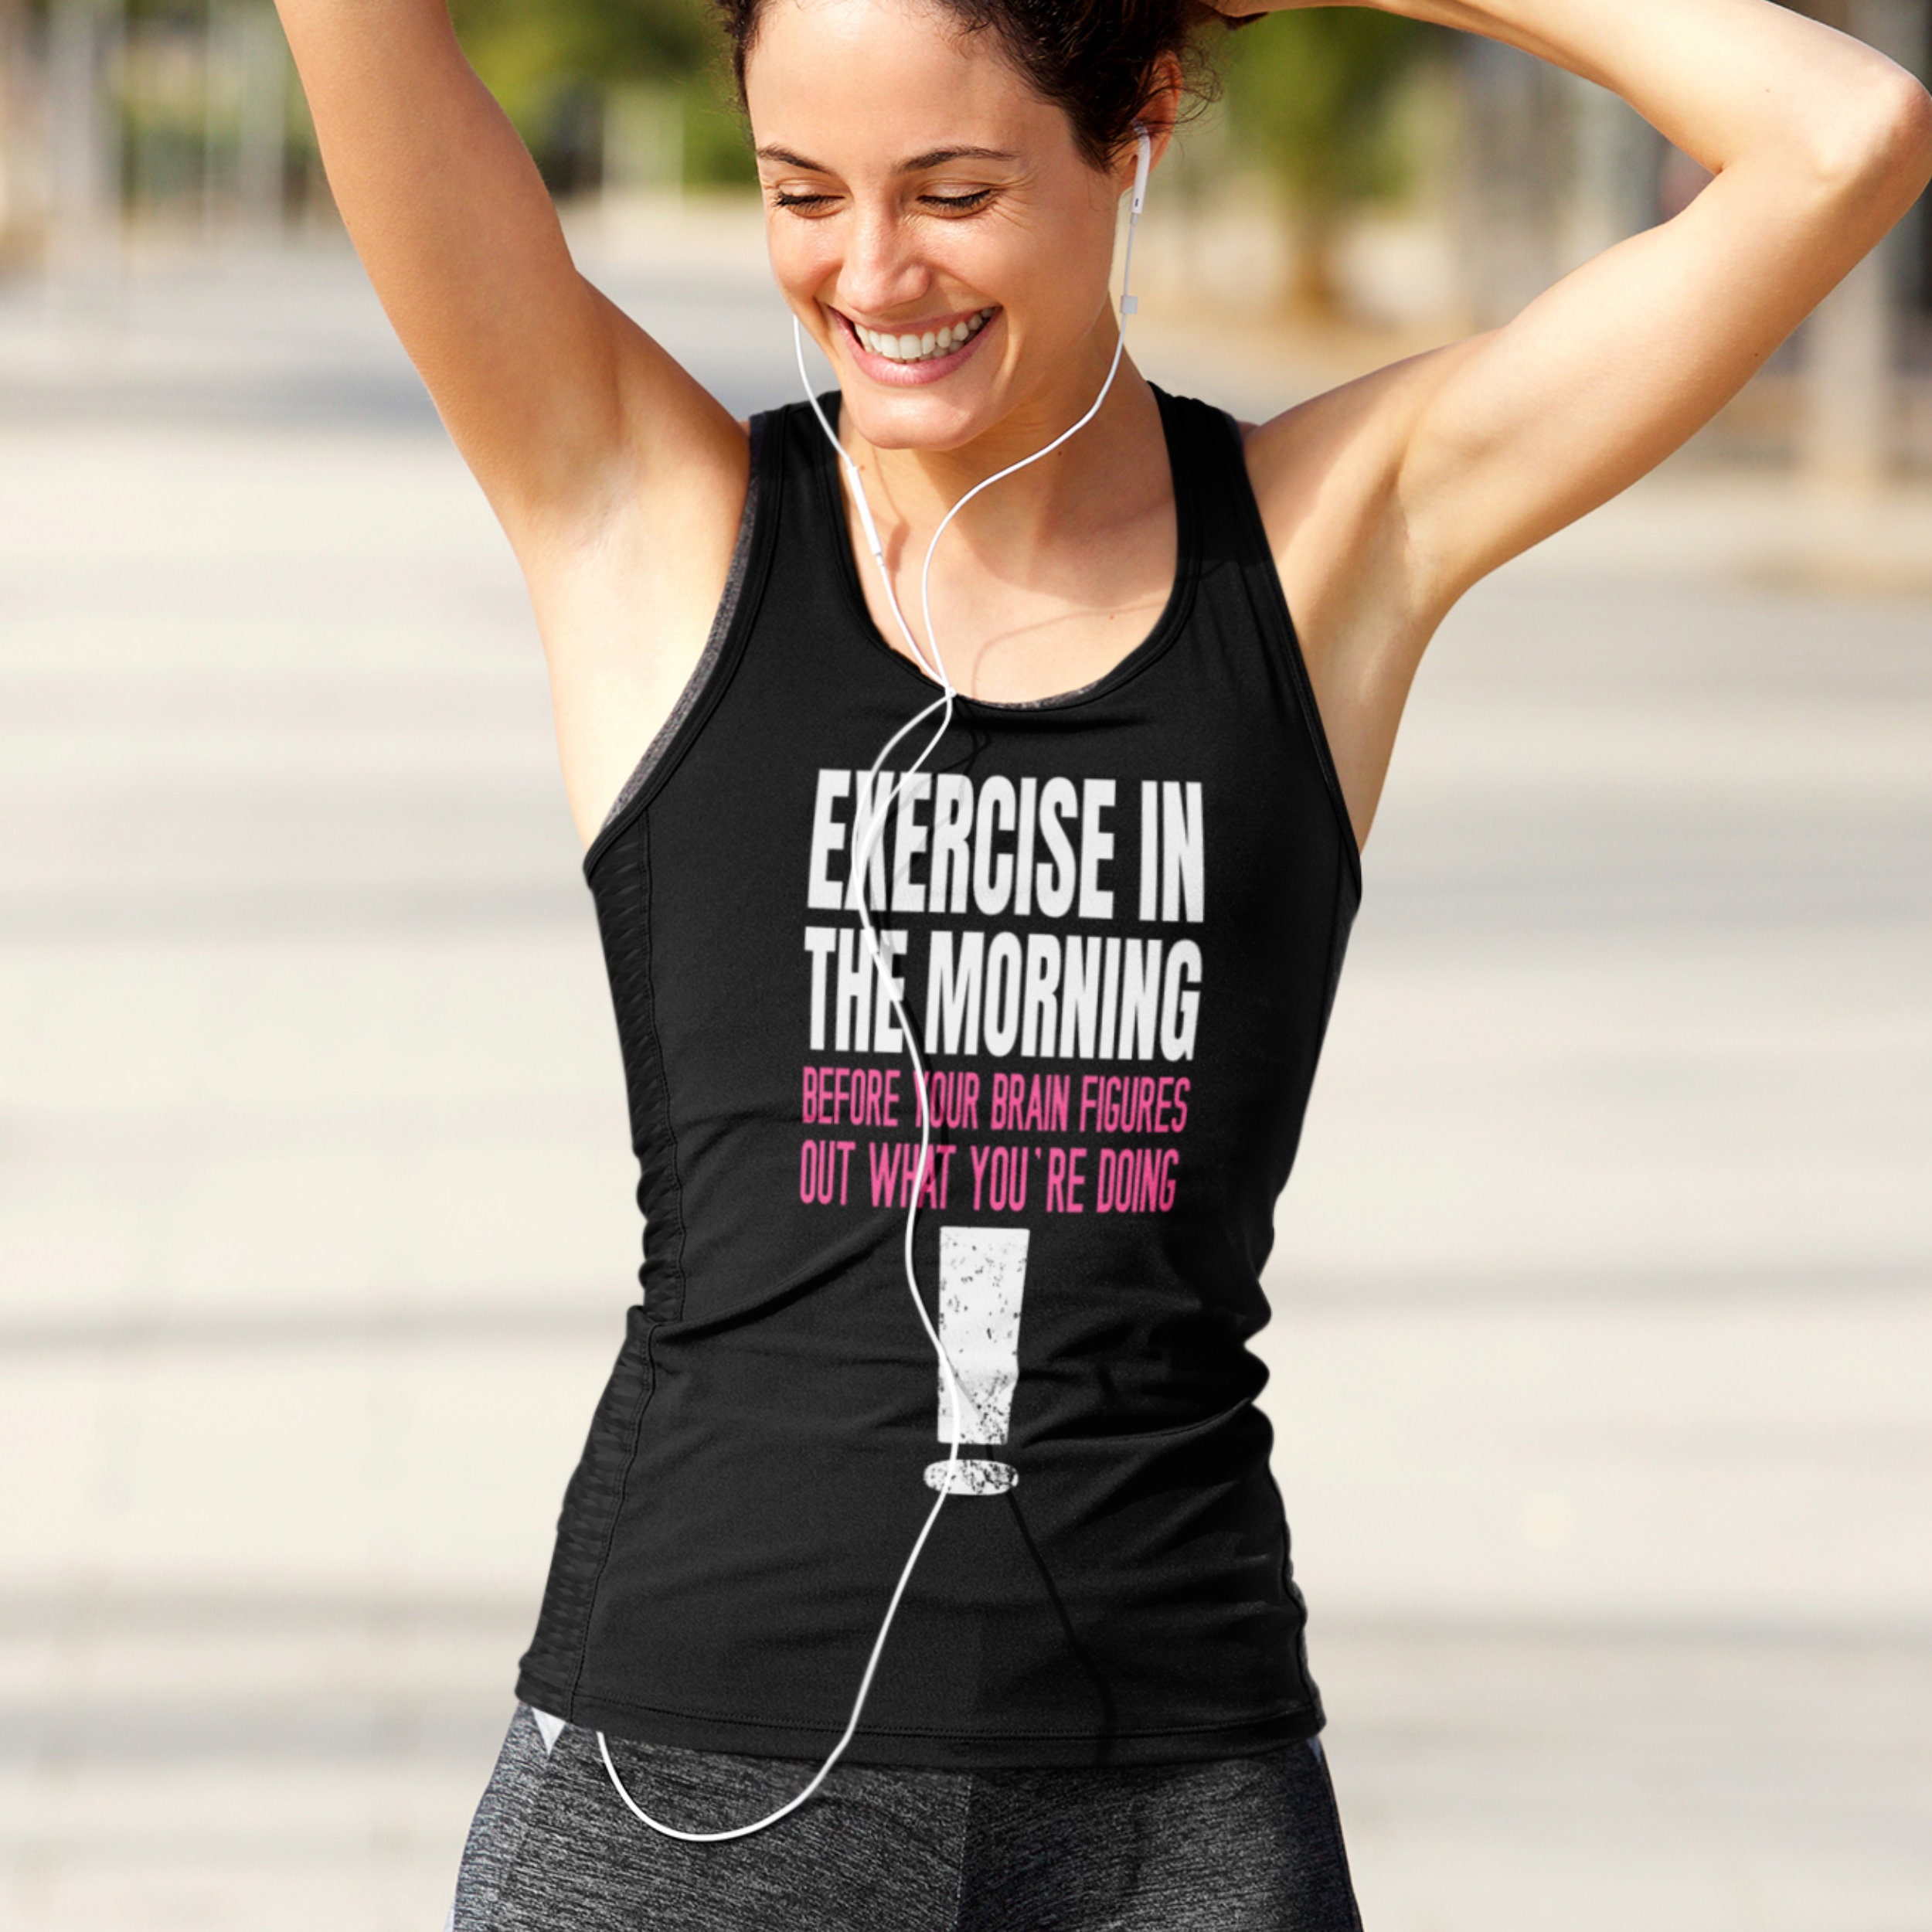 Funny Workout Tanks for Ladies, Fitness Shirt for Women, Workout Shirts, Exercise  Shirt, Gift for Women -  Sweden